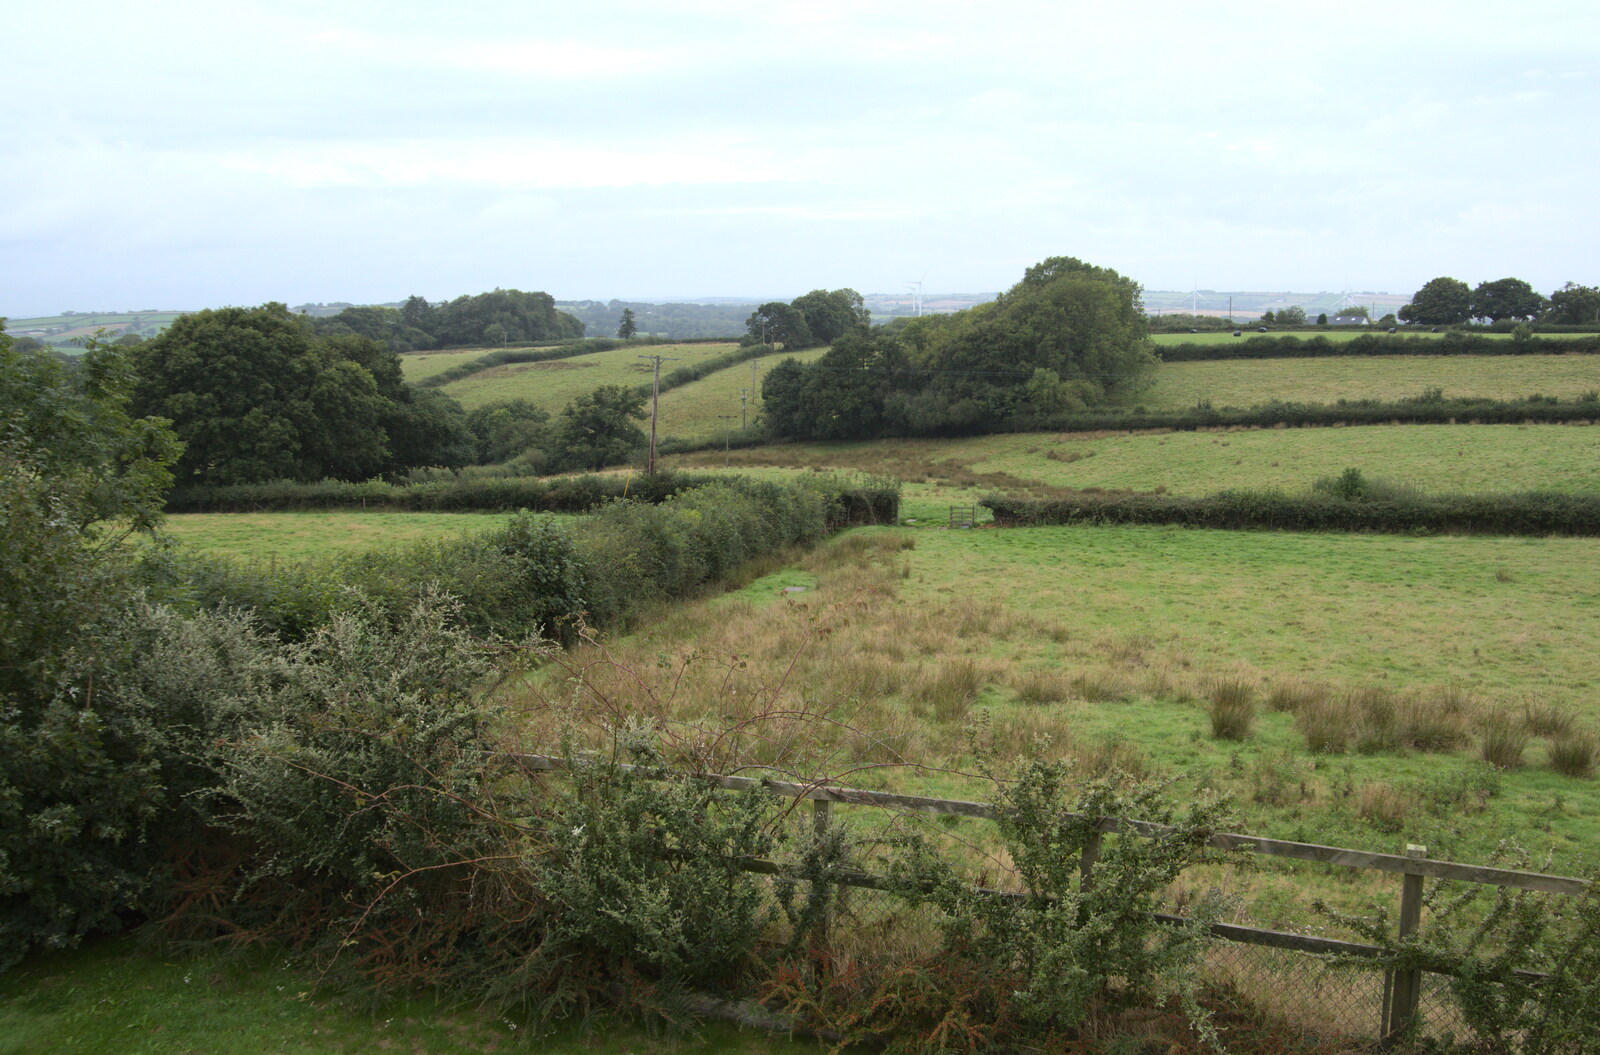 A last view from Grandma J's house from A Walk up Hound Tor, Dartmoor, Devon - 24th August 2020